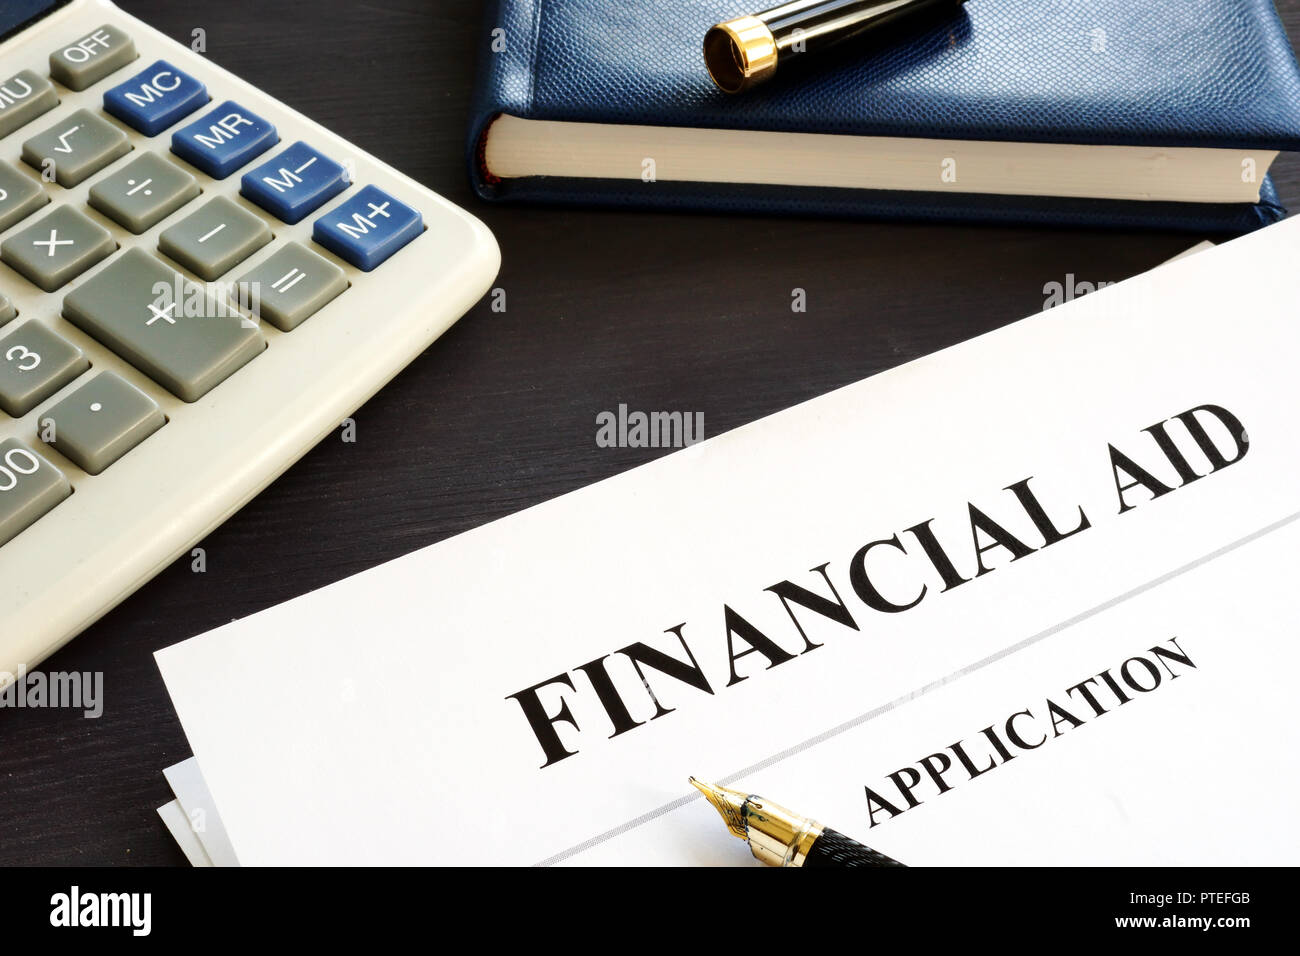 Financial aid application on a desk. Student loan. Stock Photo